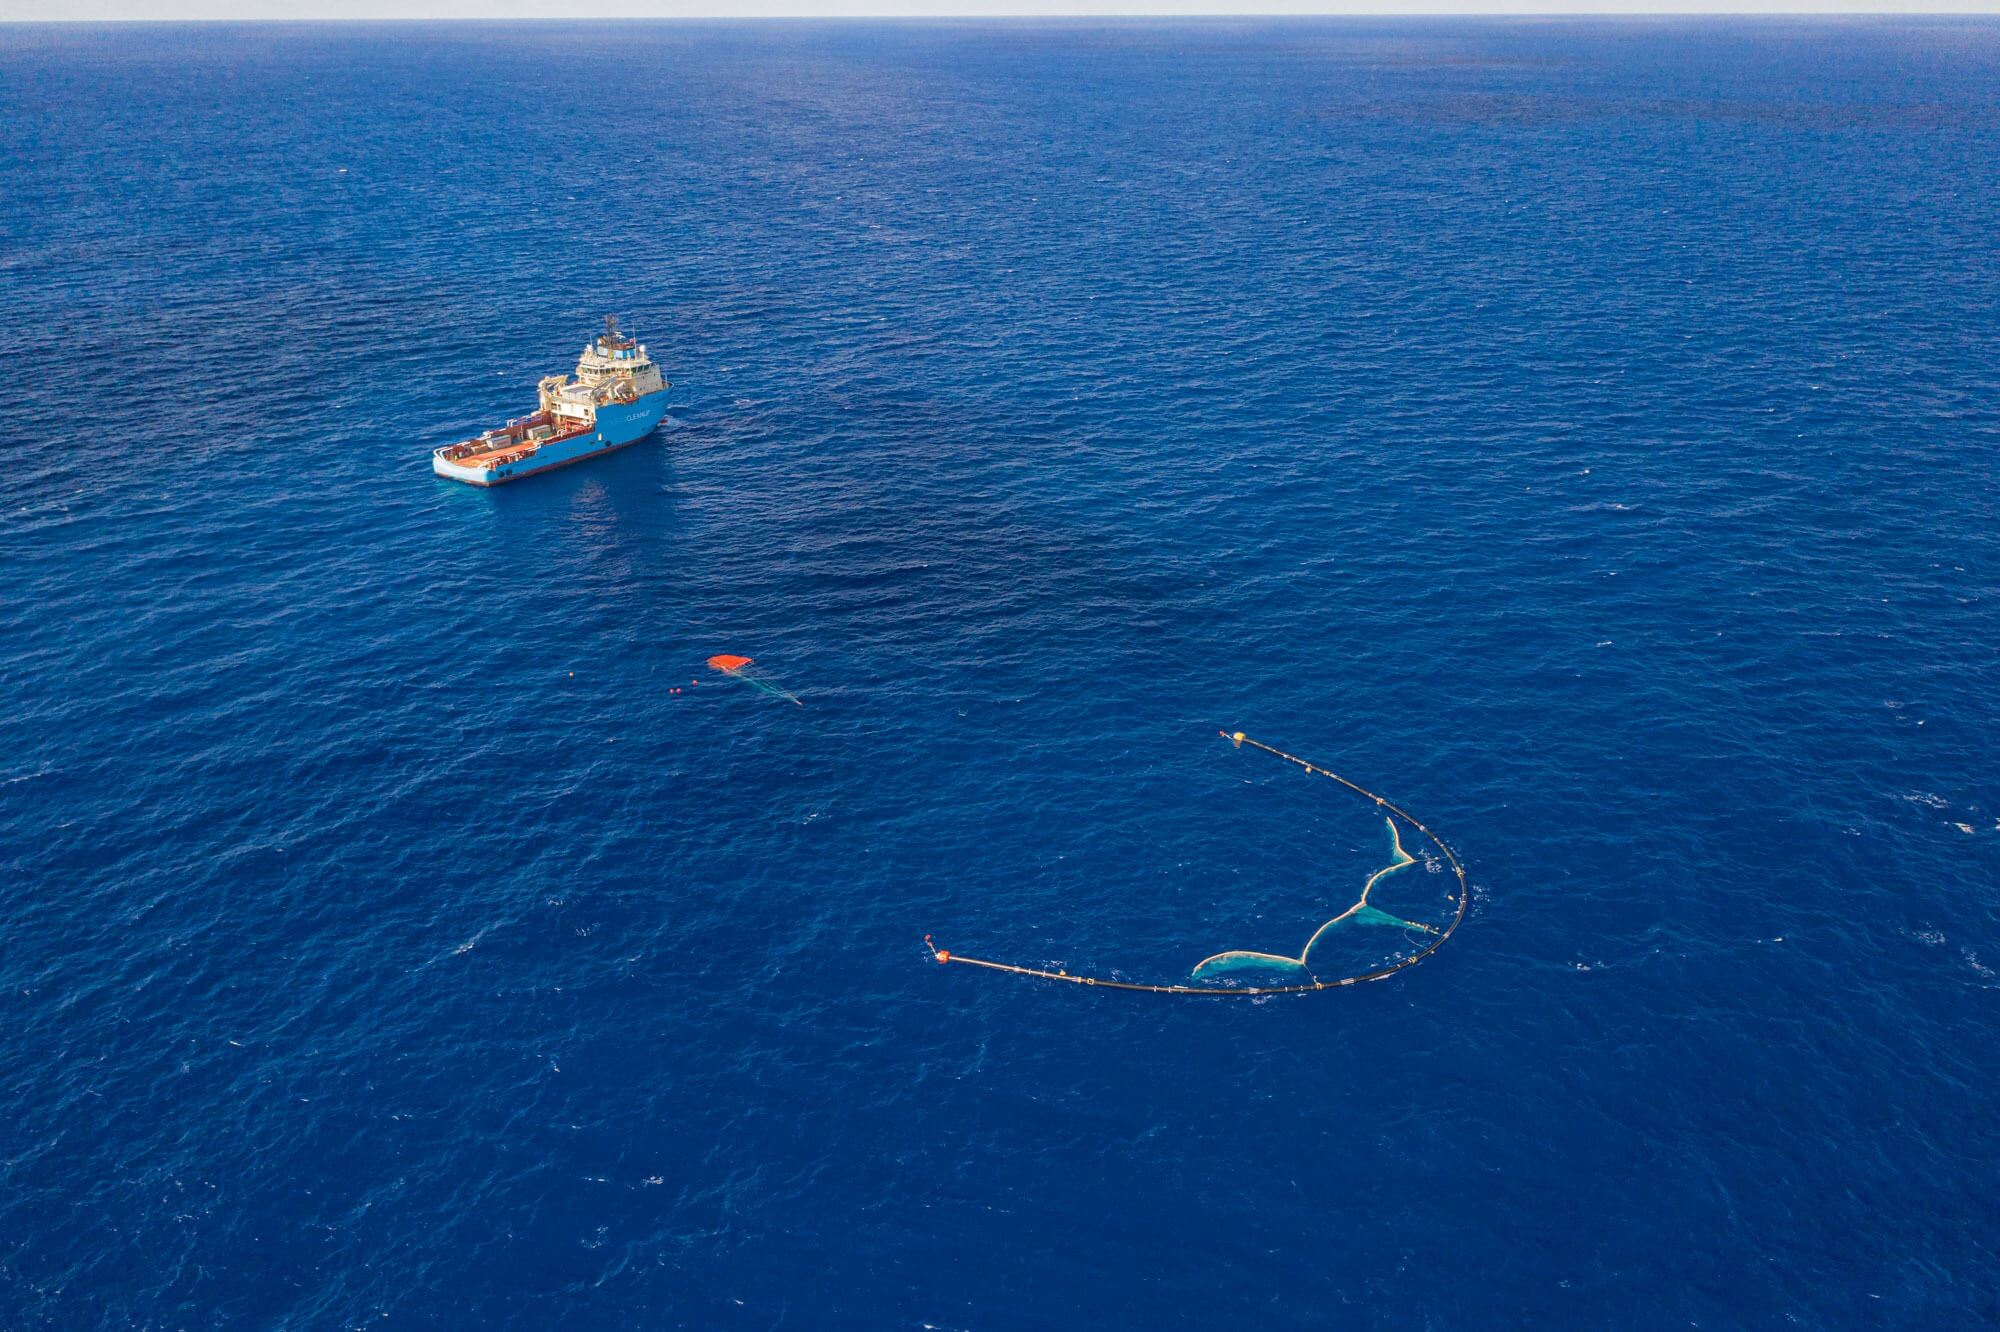 Prototype of the Interceptor system to clean oceans